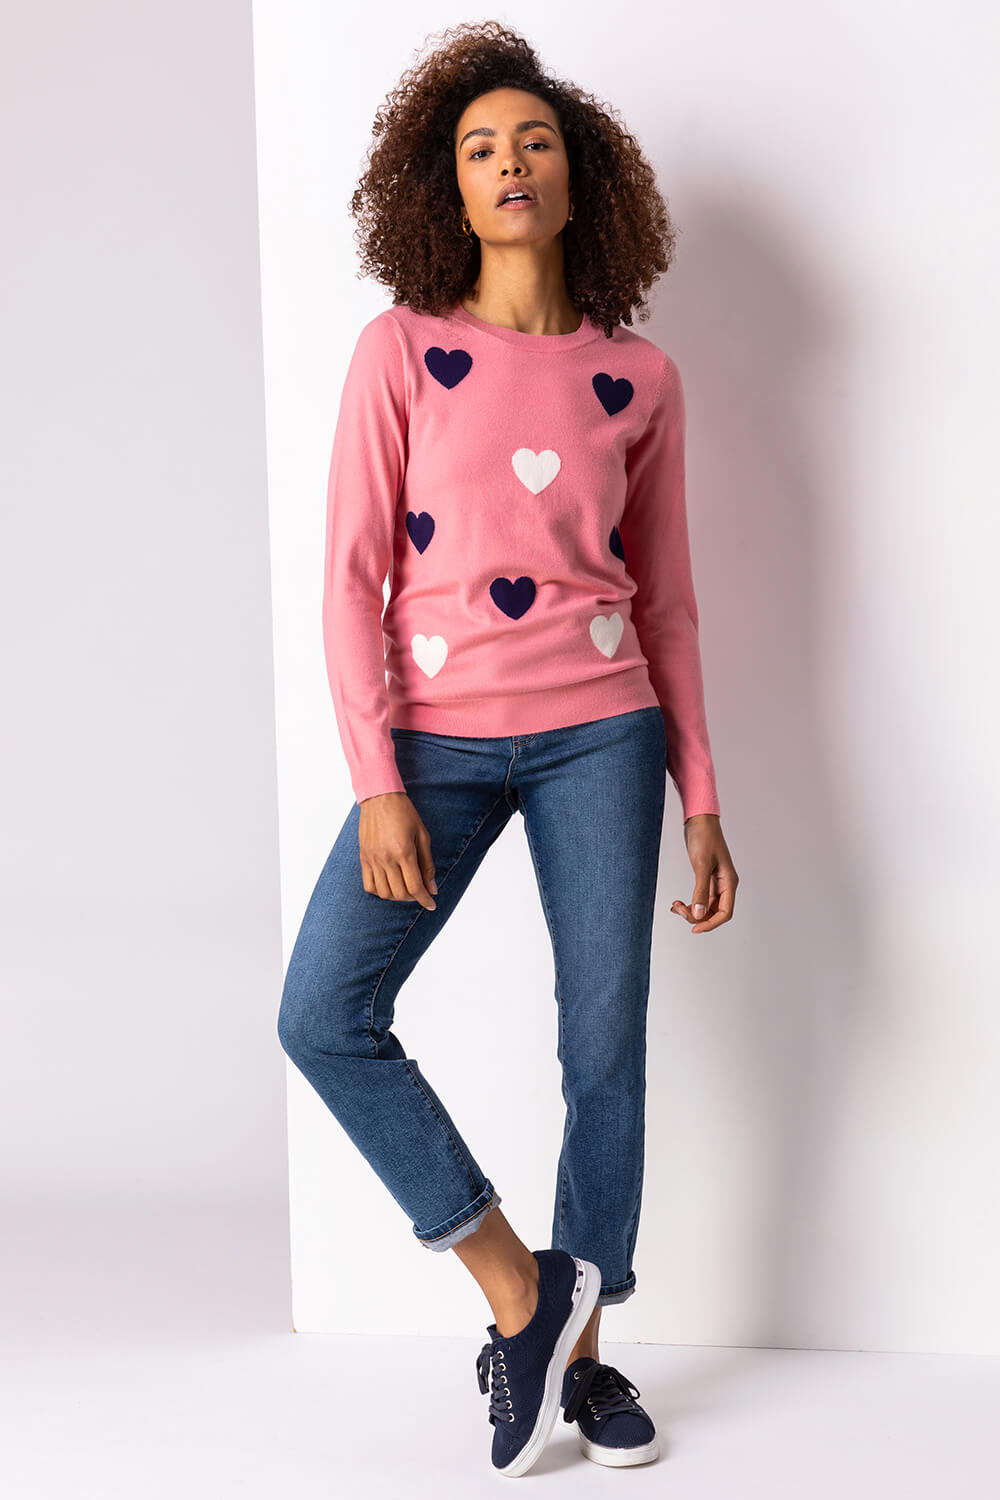 CORAL Heart Print Crew Neck Jumper, Image 4 of 4